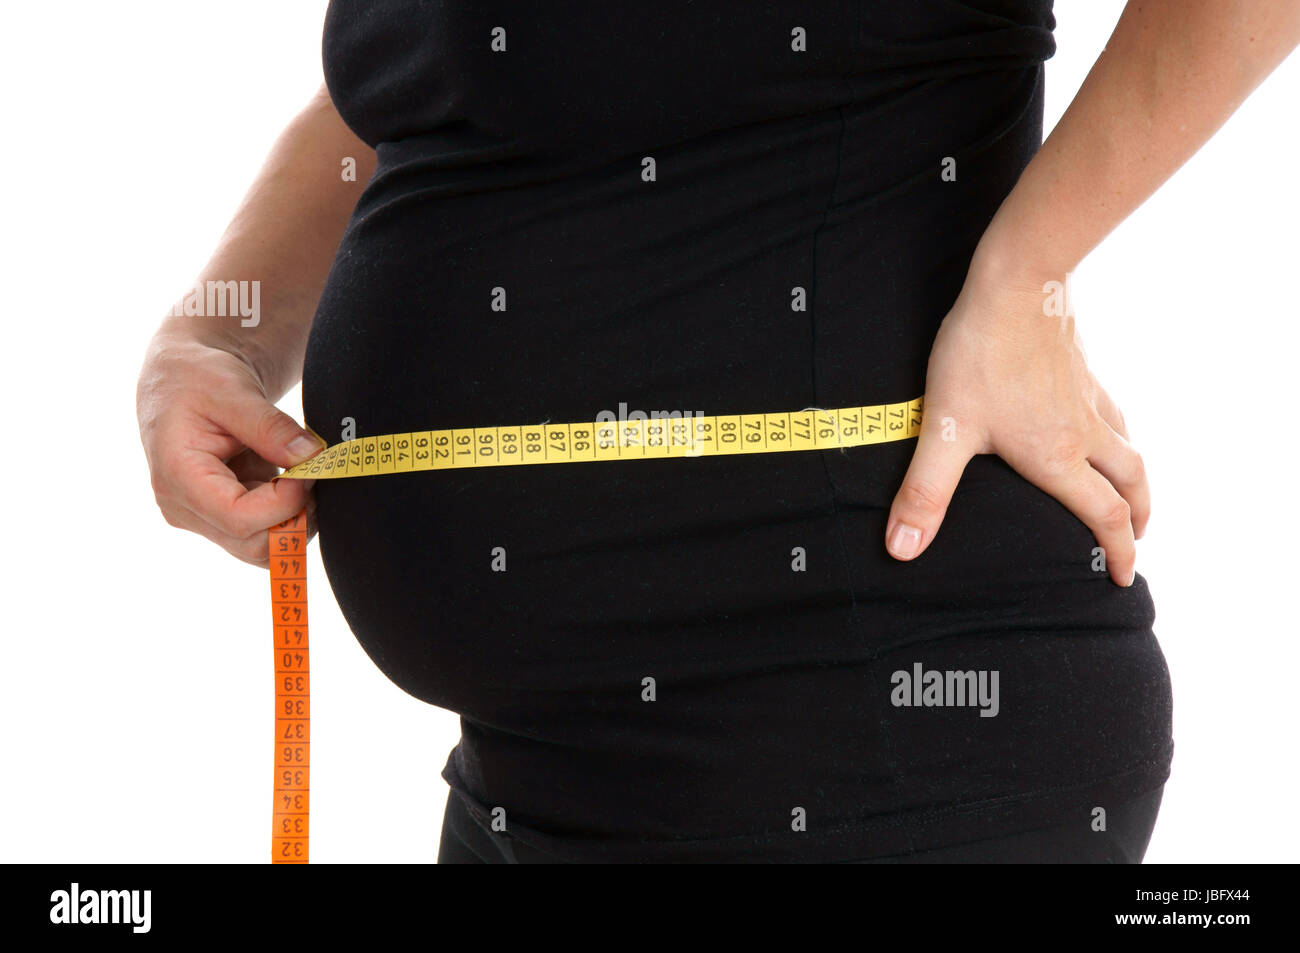 Pregnant woman measuring her waist Stock Photo